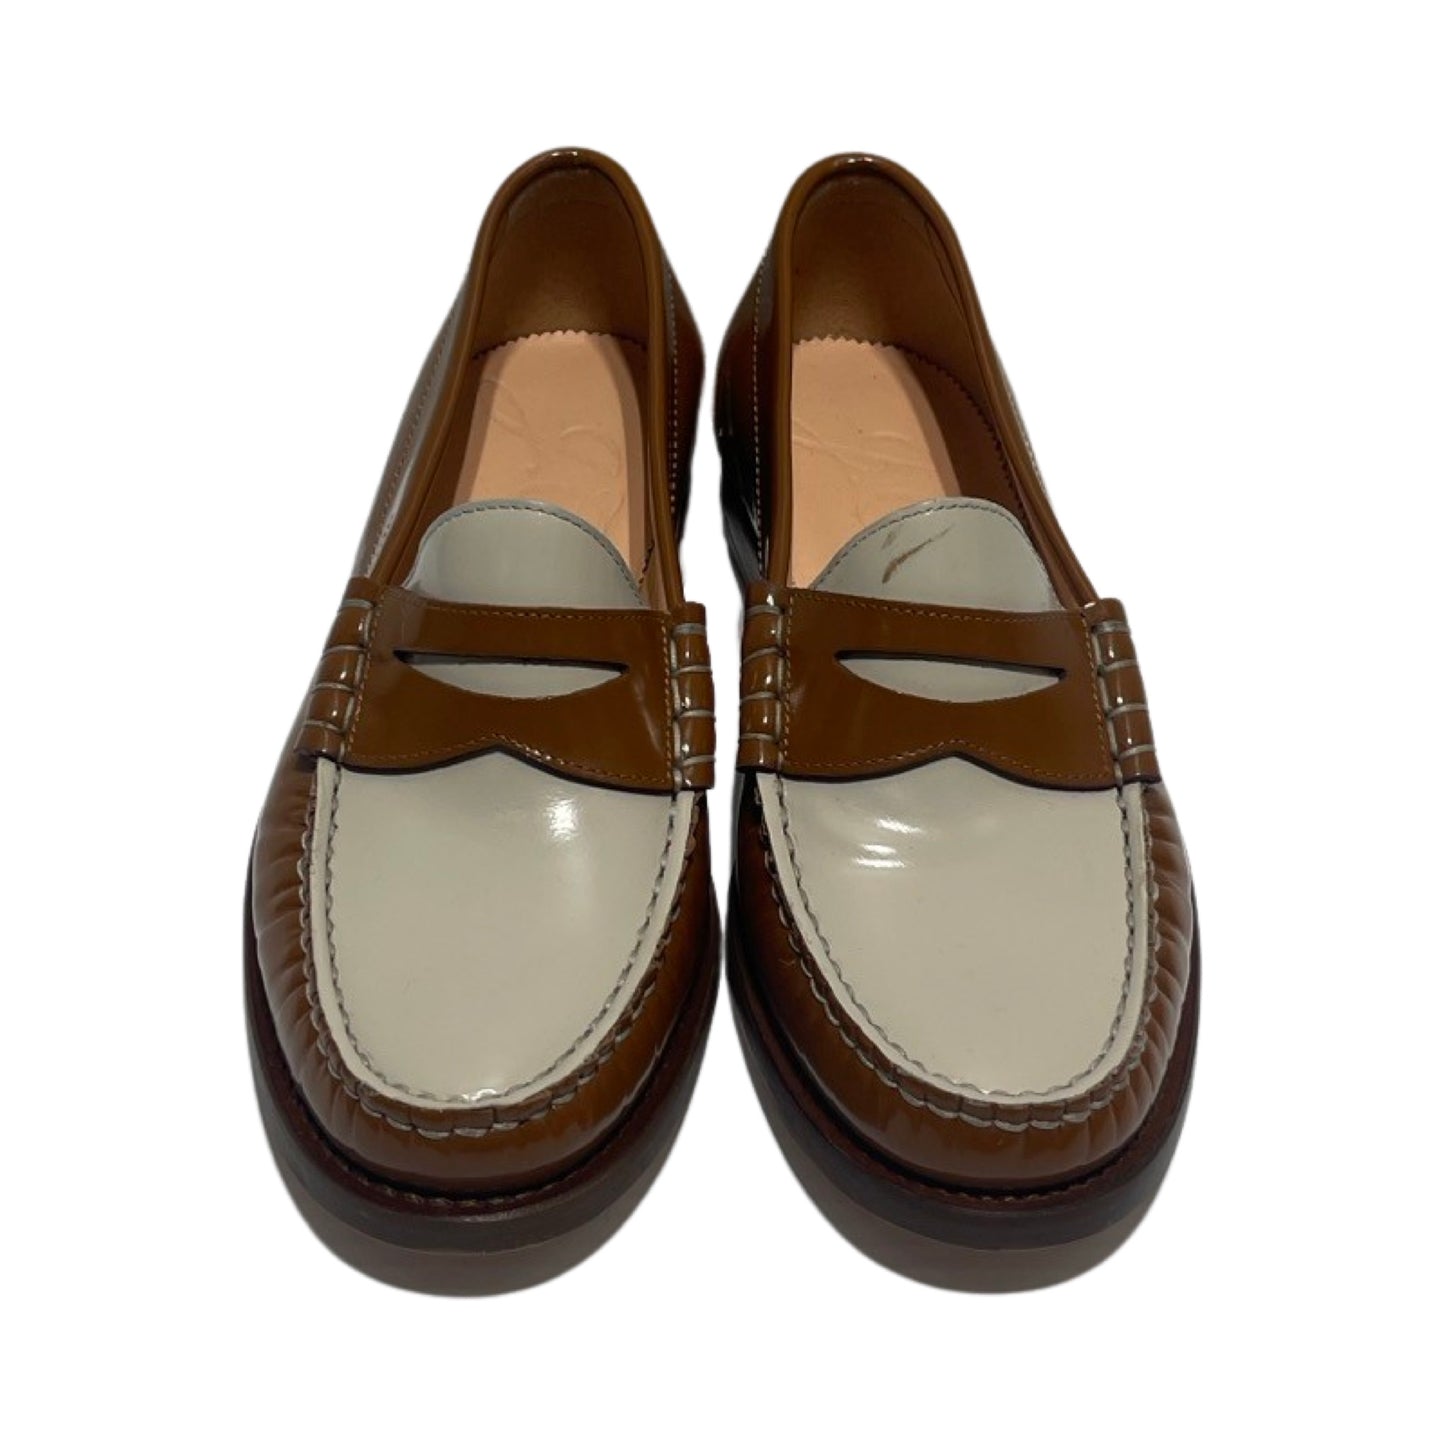 Shoes Flats Loafer Oxford By J Crew  Size: 6